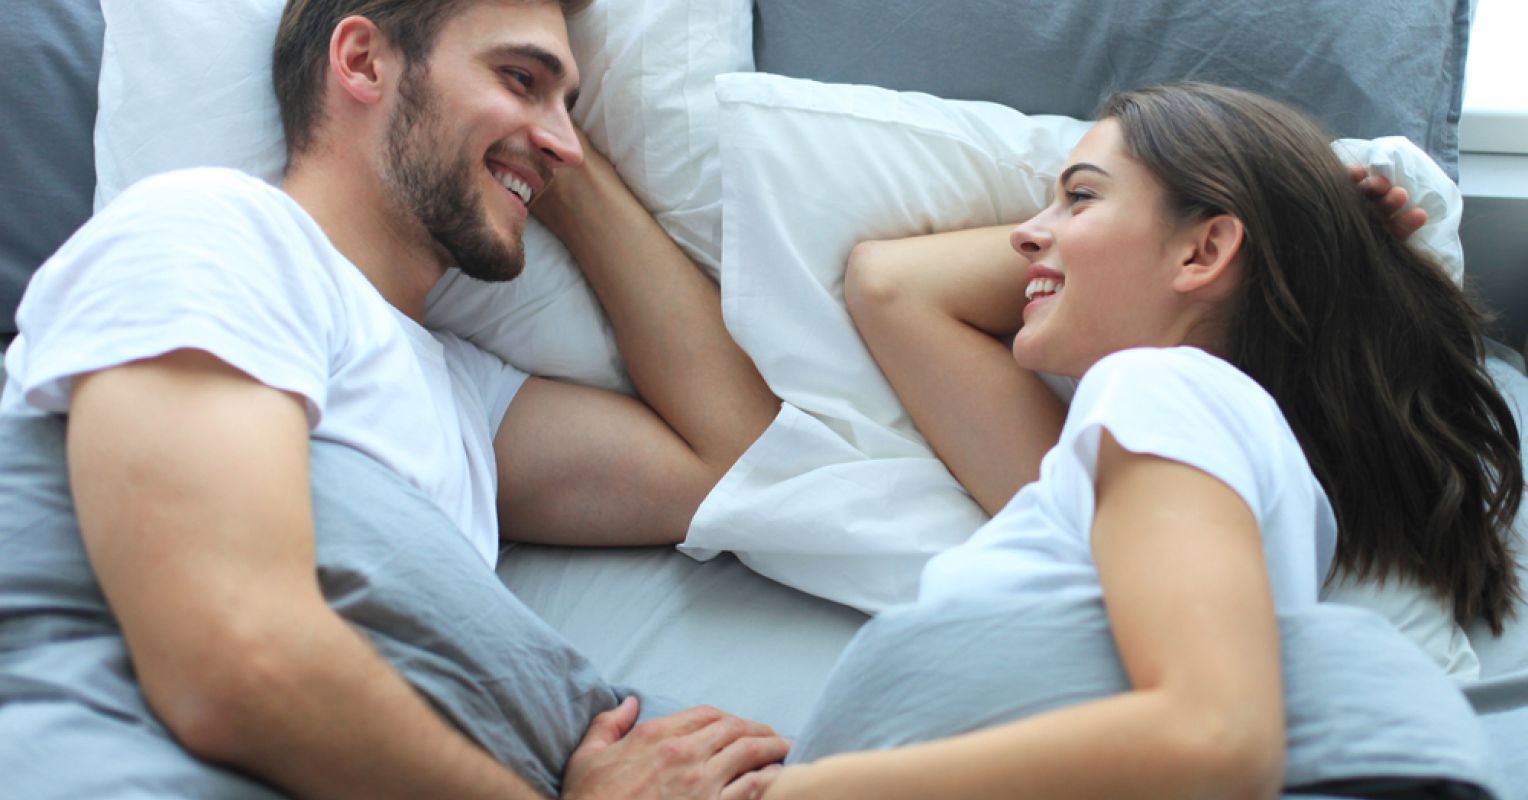 Pleasing Your Partner Is Half the Fun Psychology Today photo